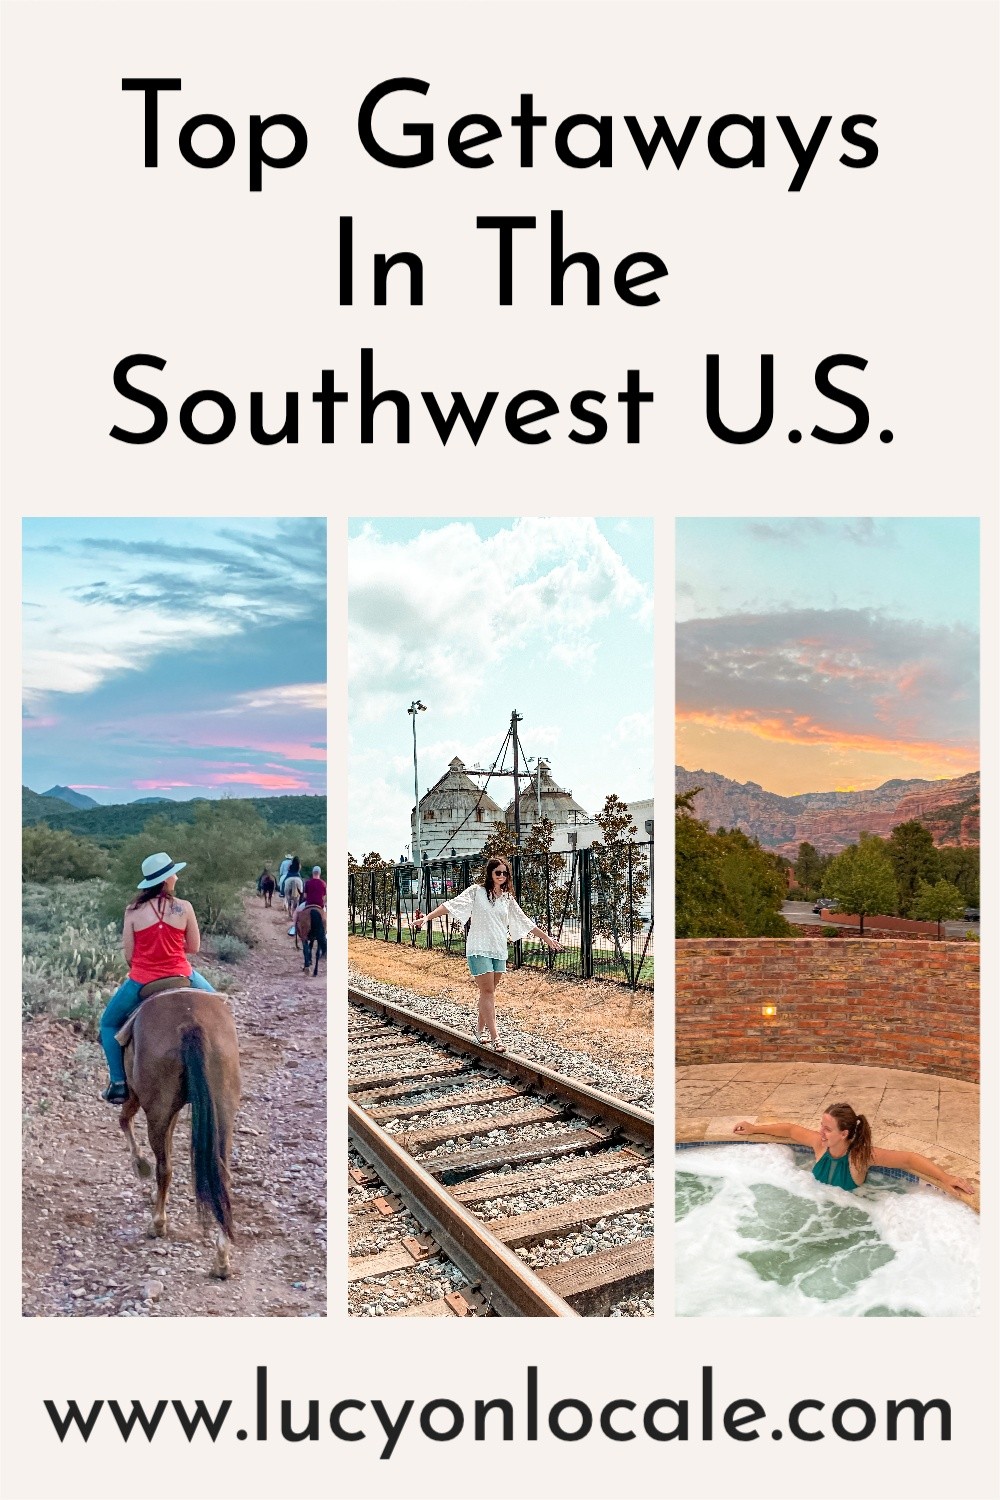 Top Getaways in the Southwest United States